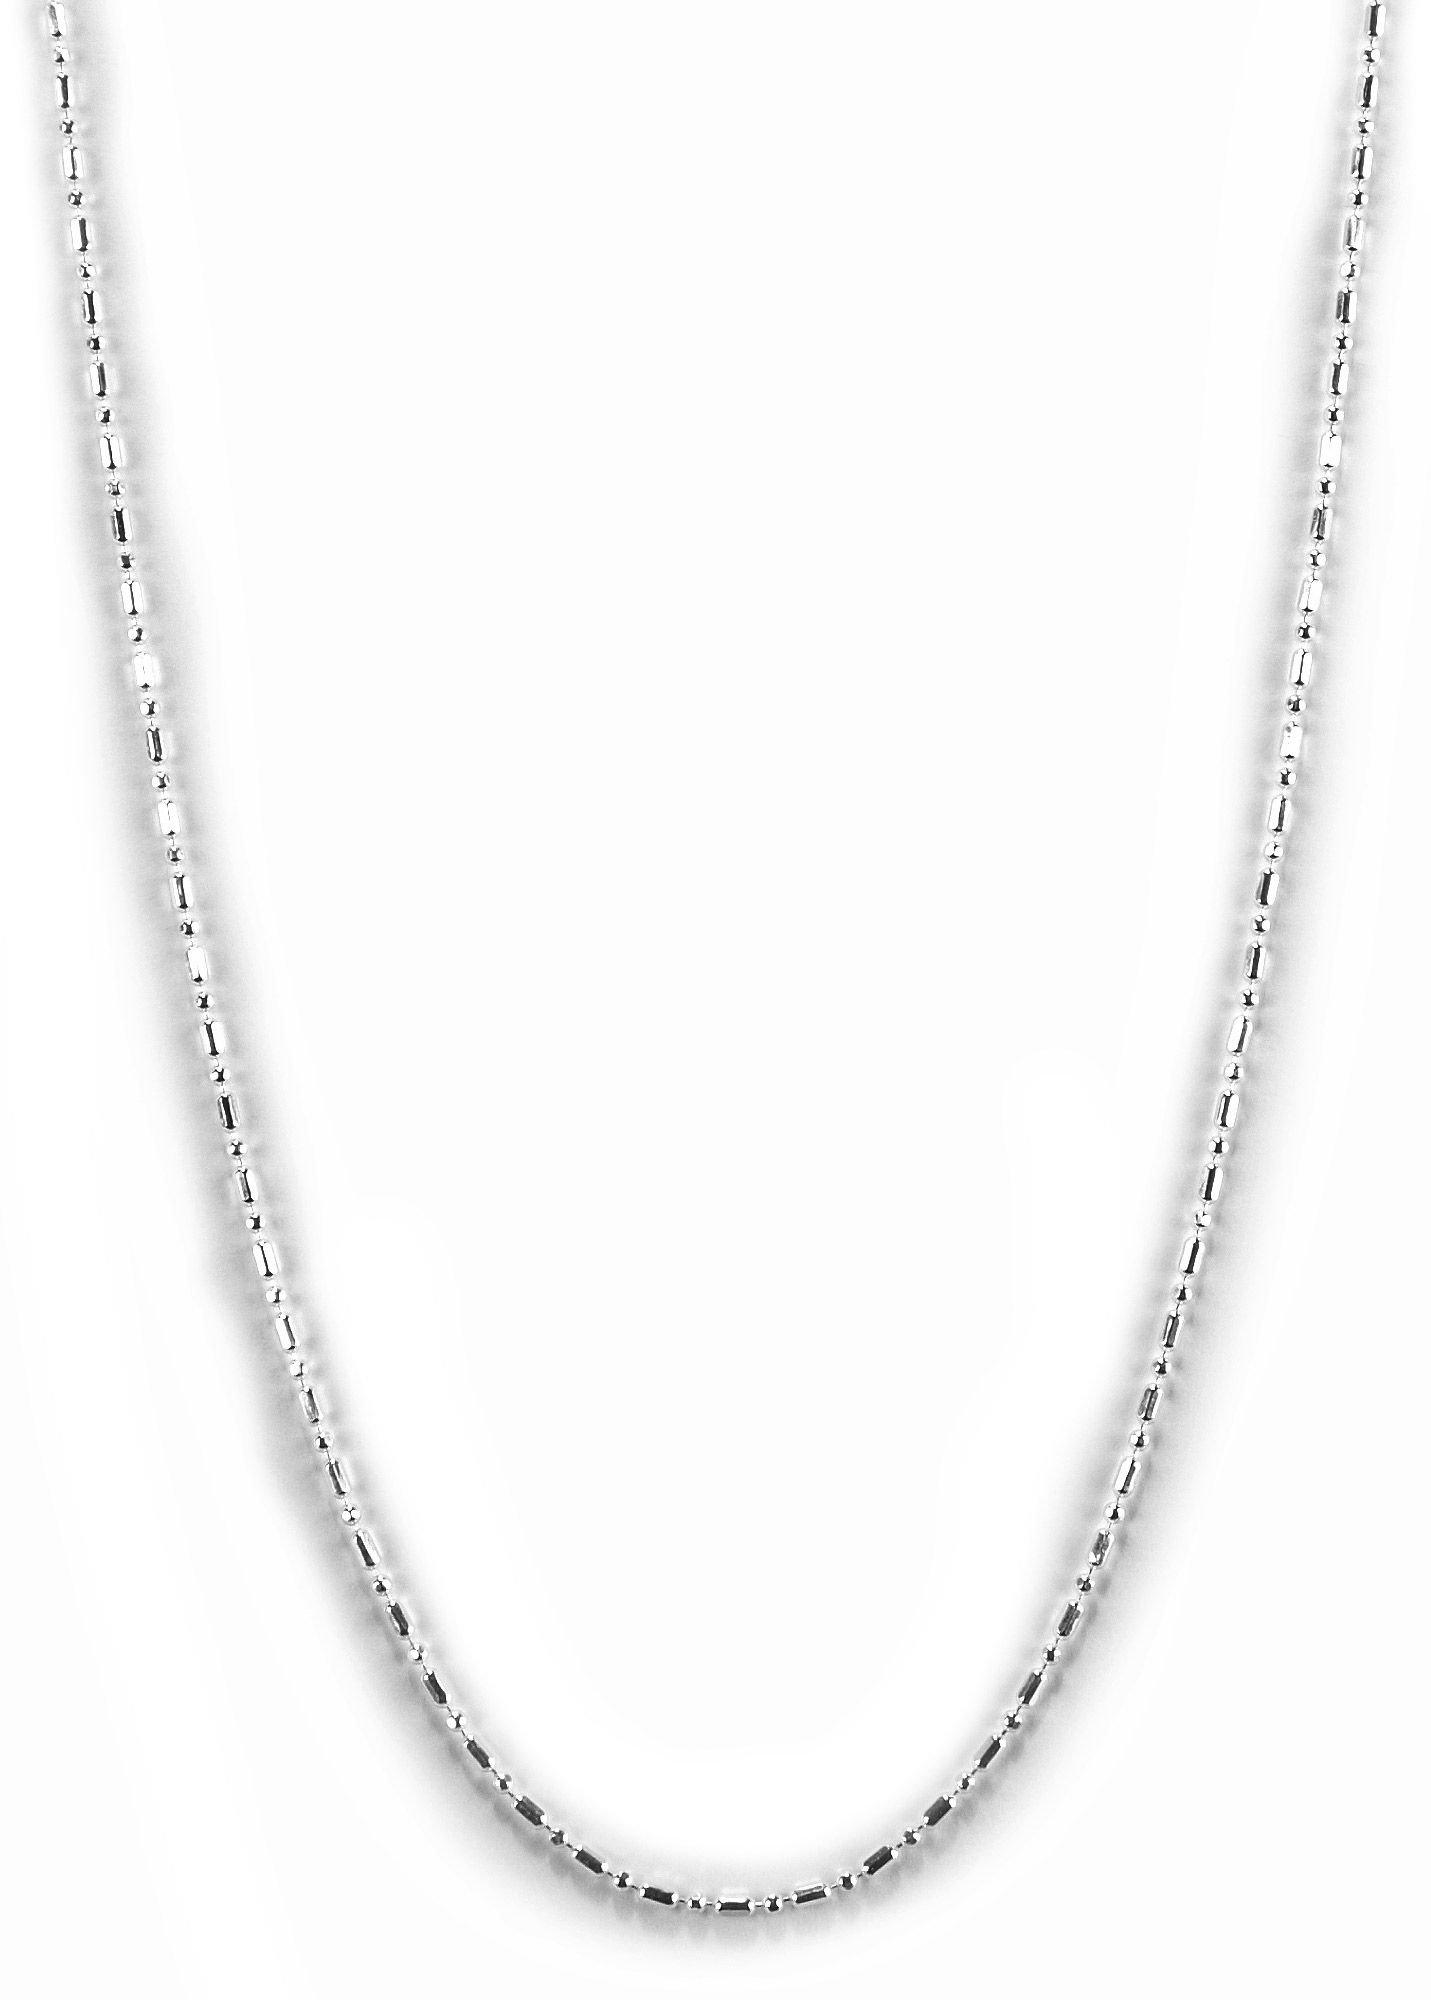 Silver Tone Dashed Chain Necklace